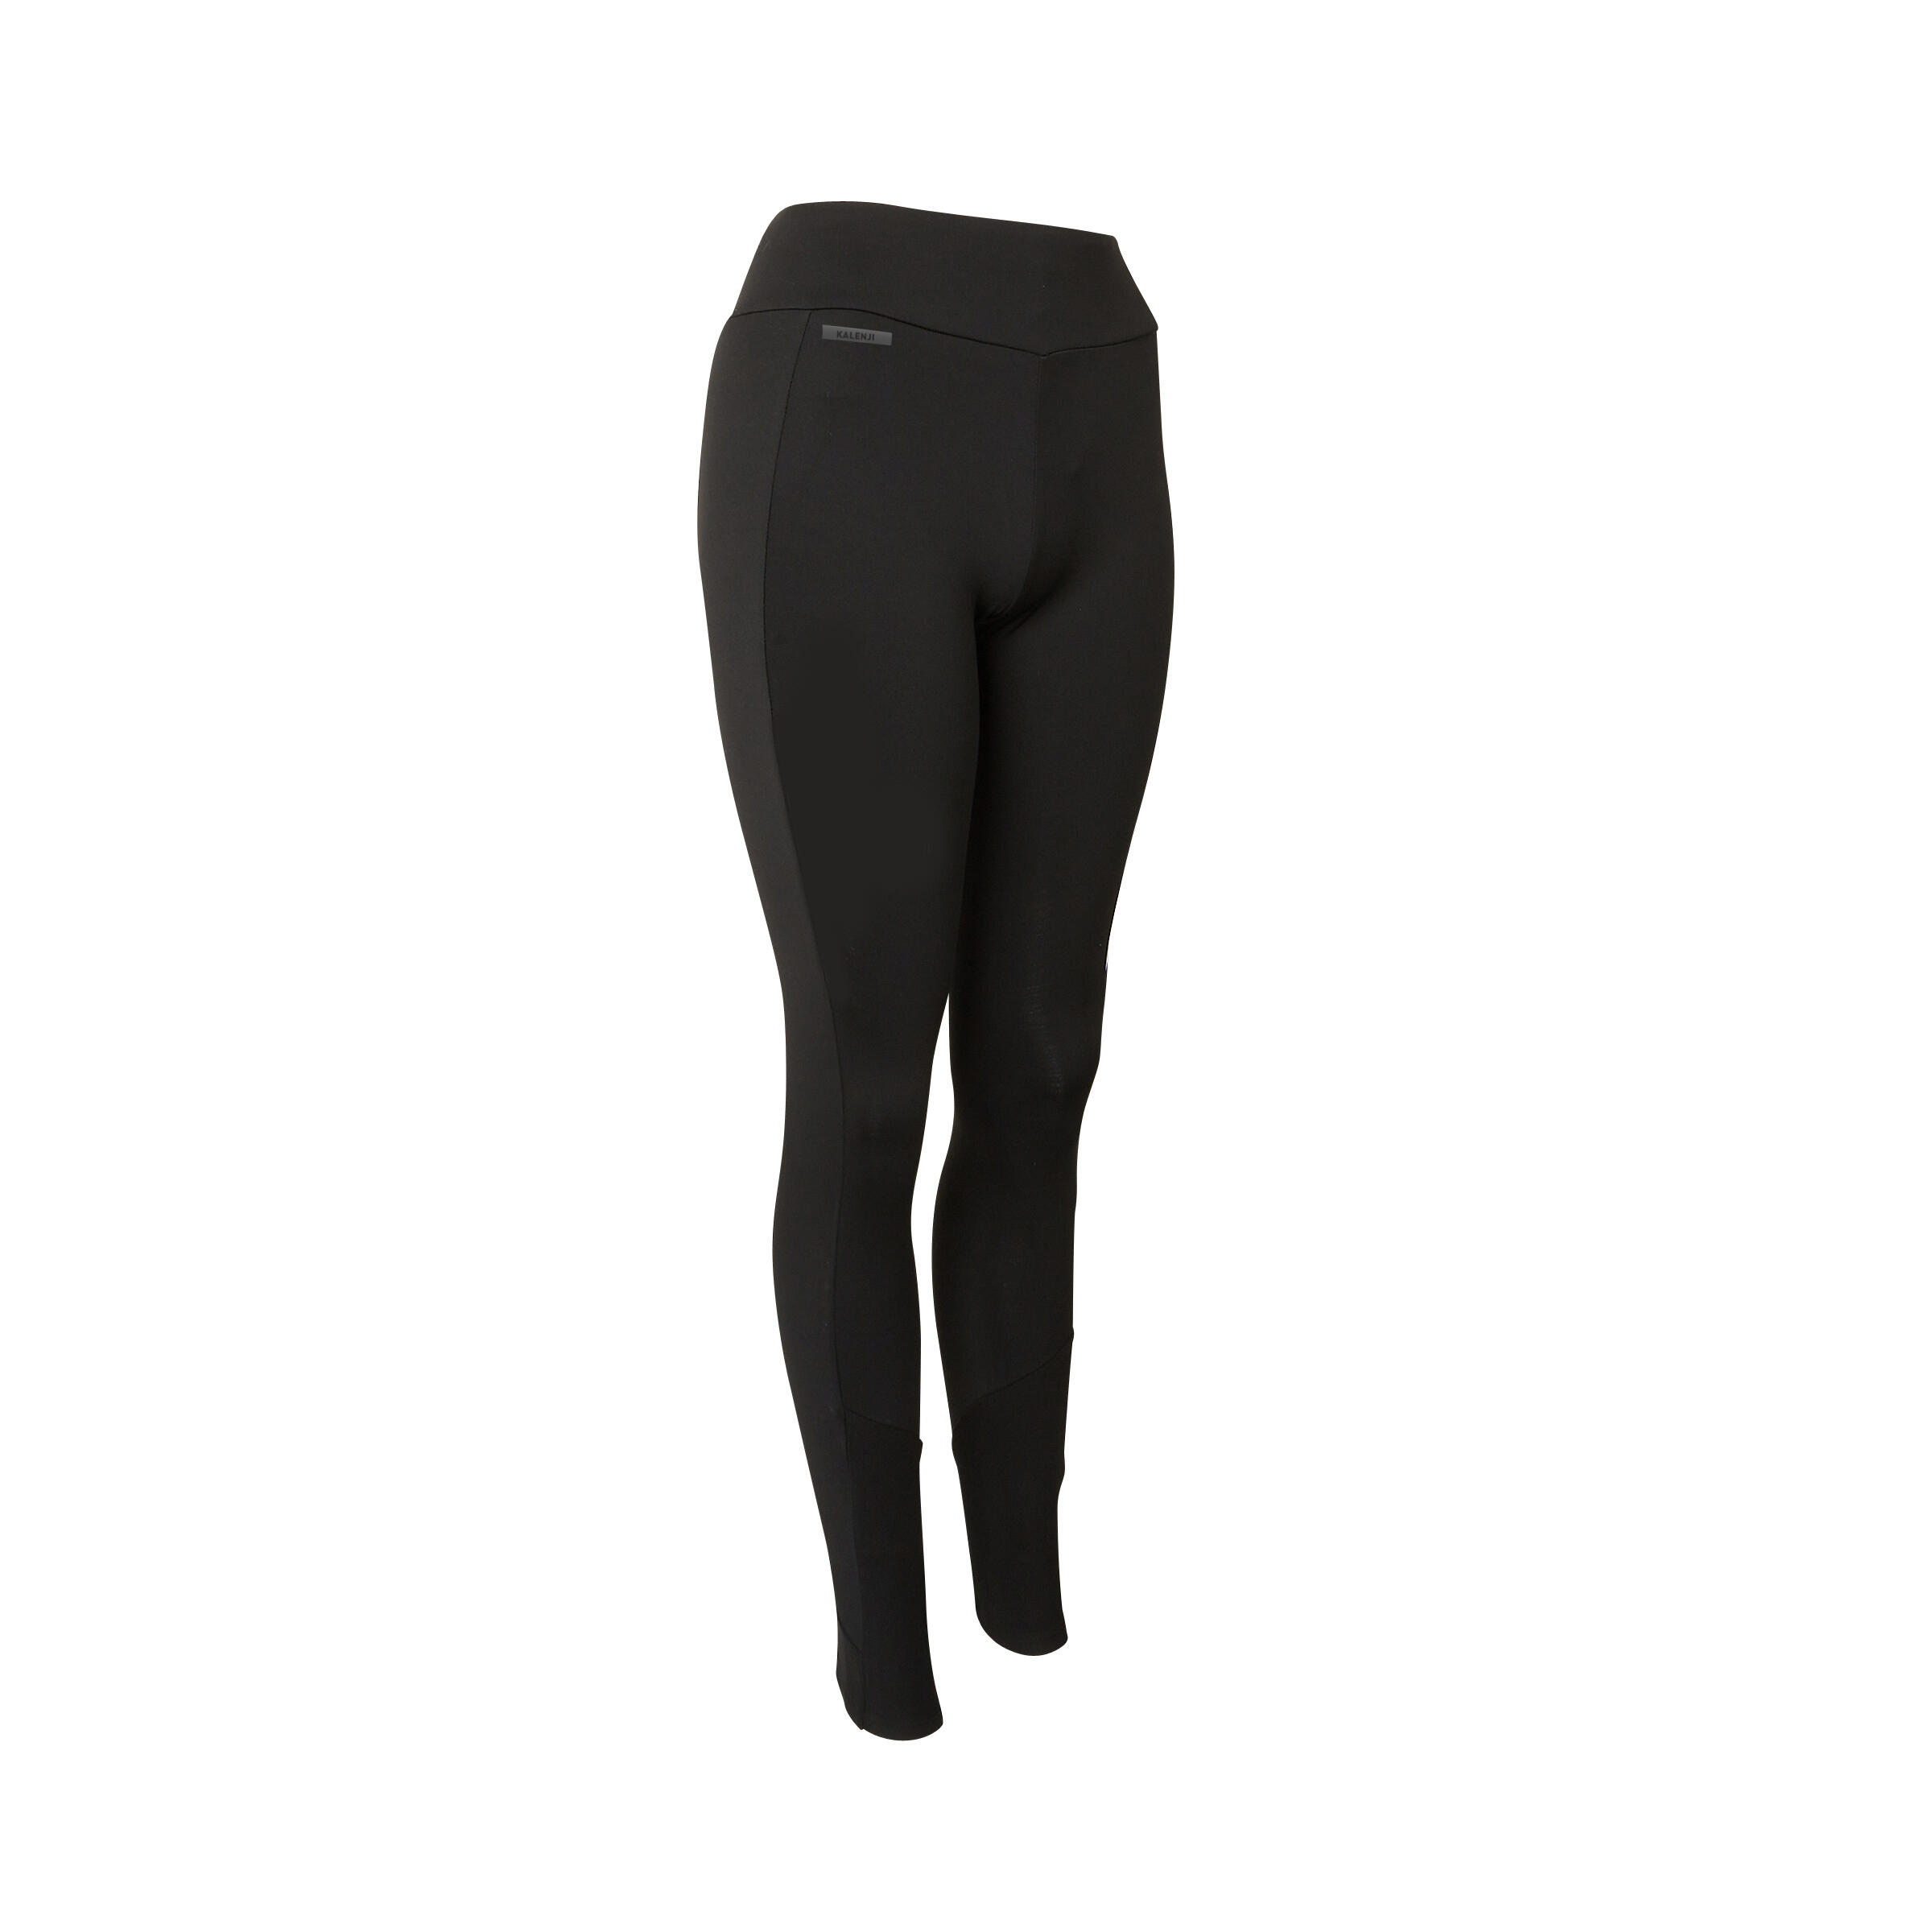 KALENJI by Decathlon Solid Women Black Tights - Buy KALENJI by Decathlon  Solid Women Black Tights Online at Best Prices in India